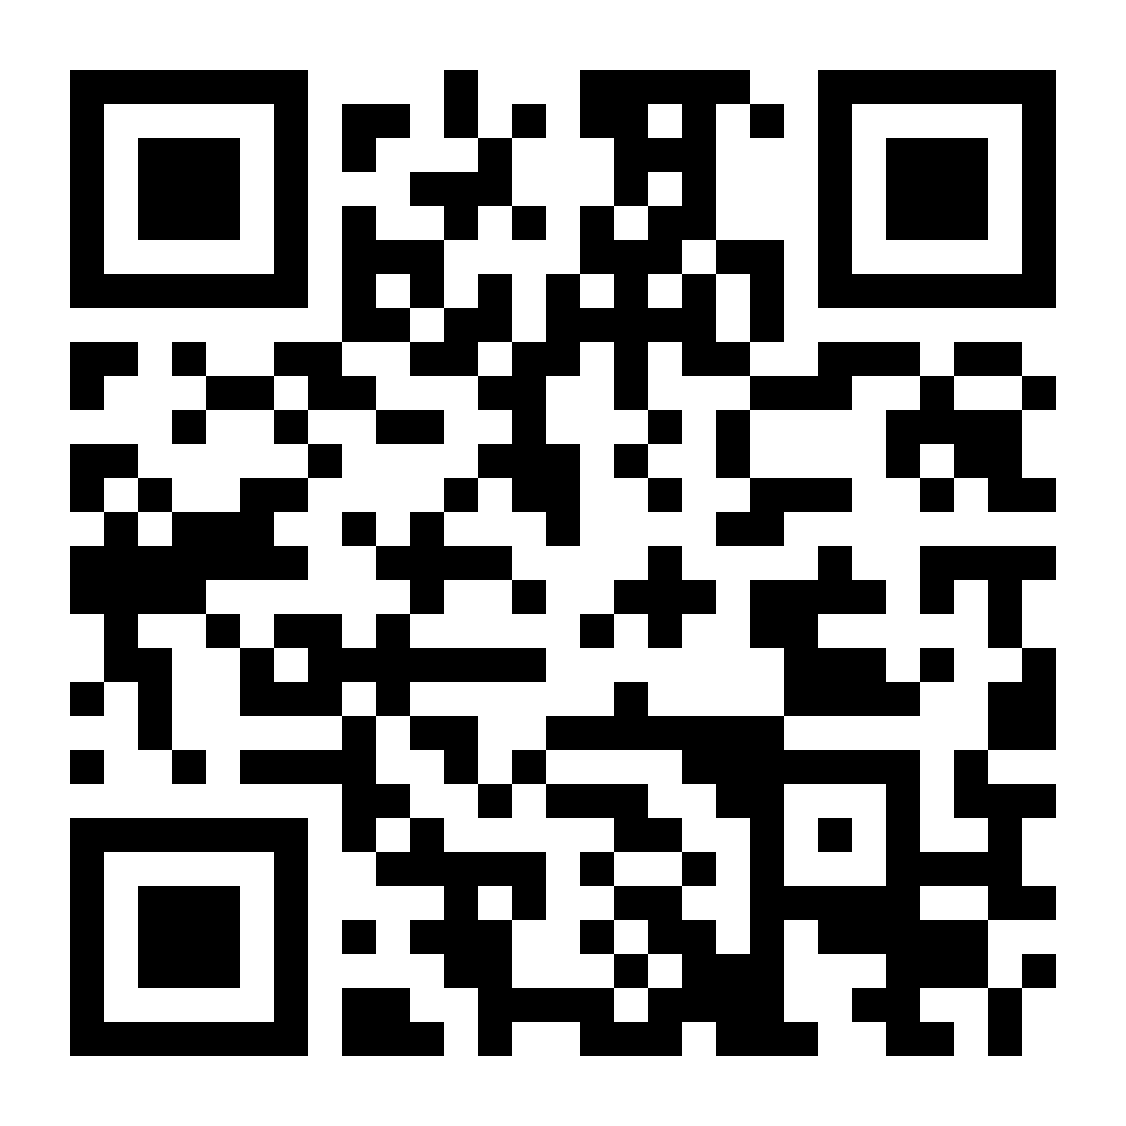 QRcode_SitoDE_hp